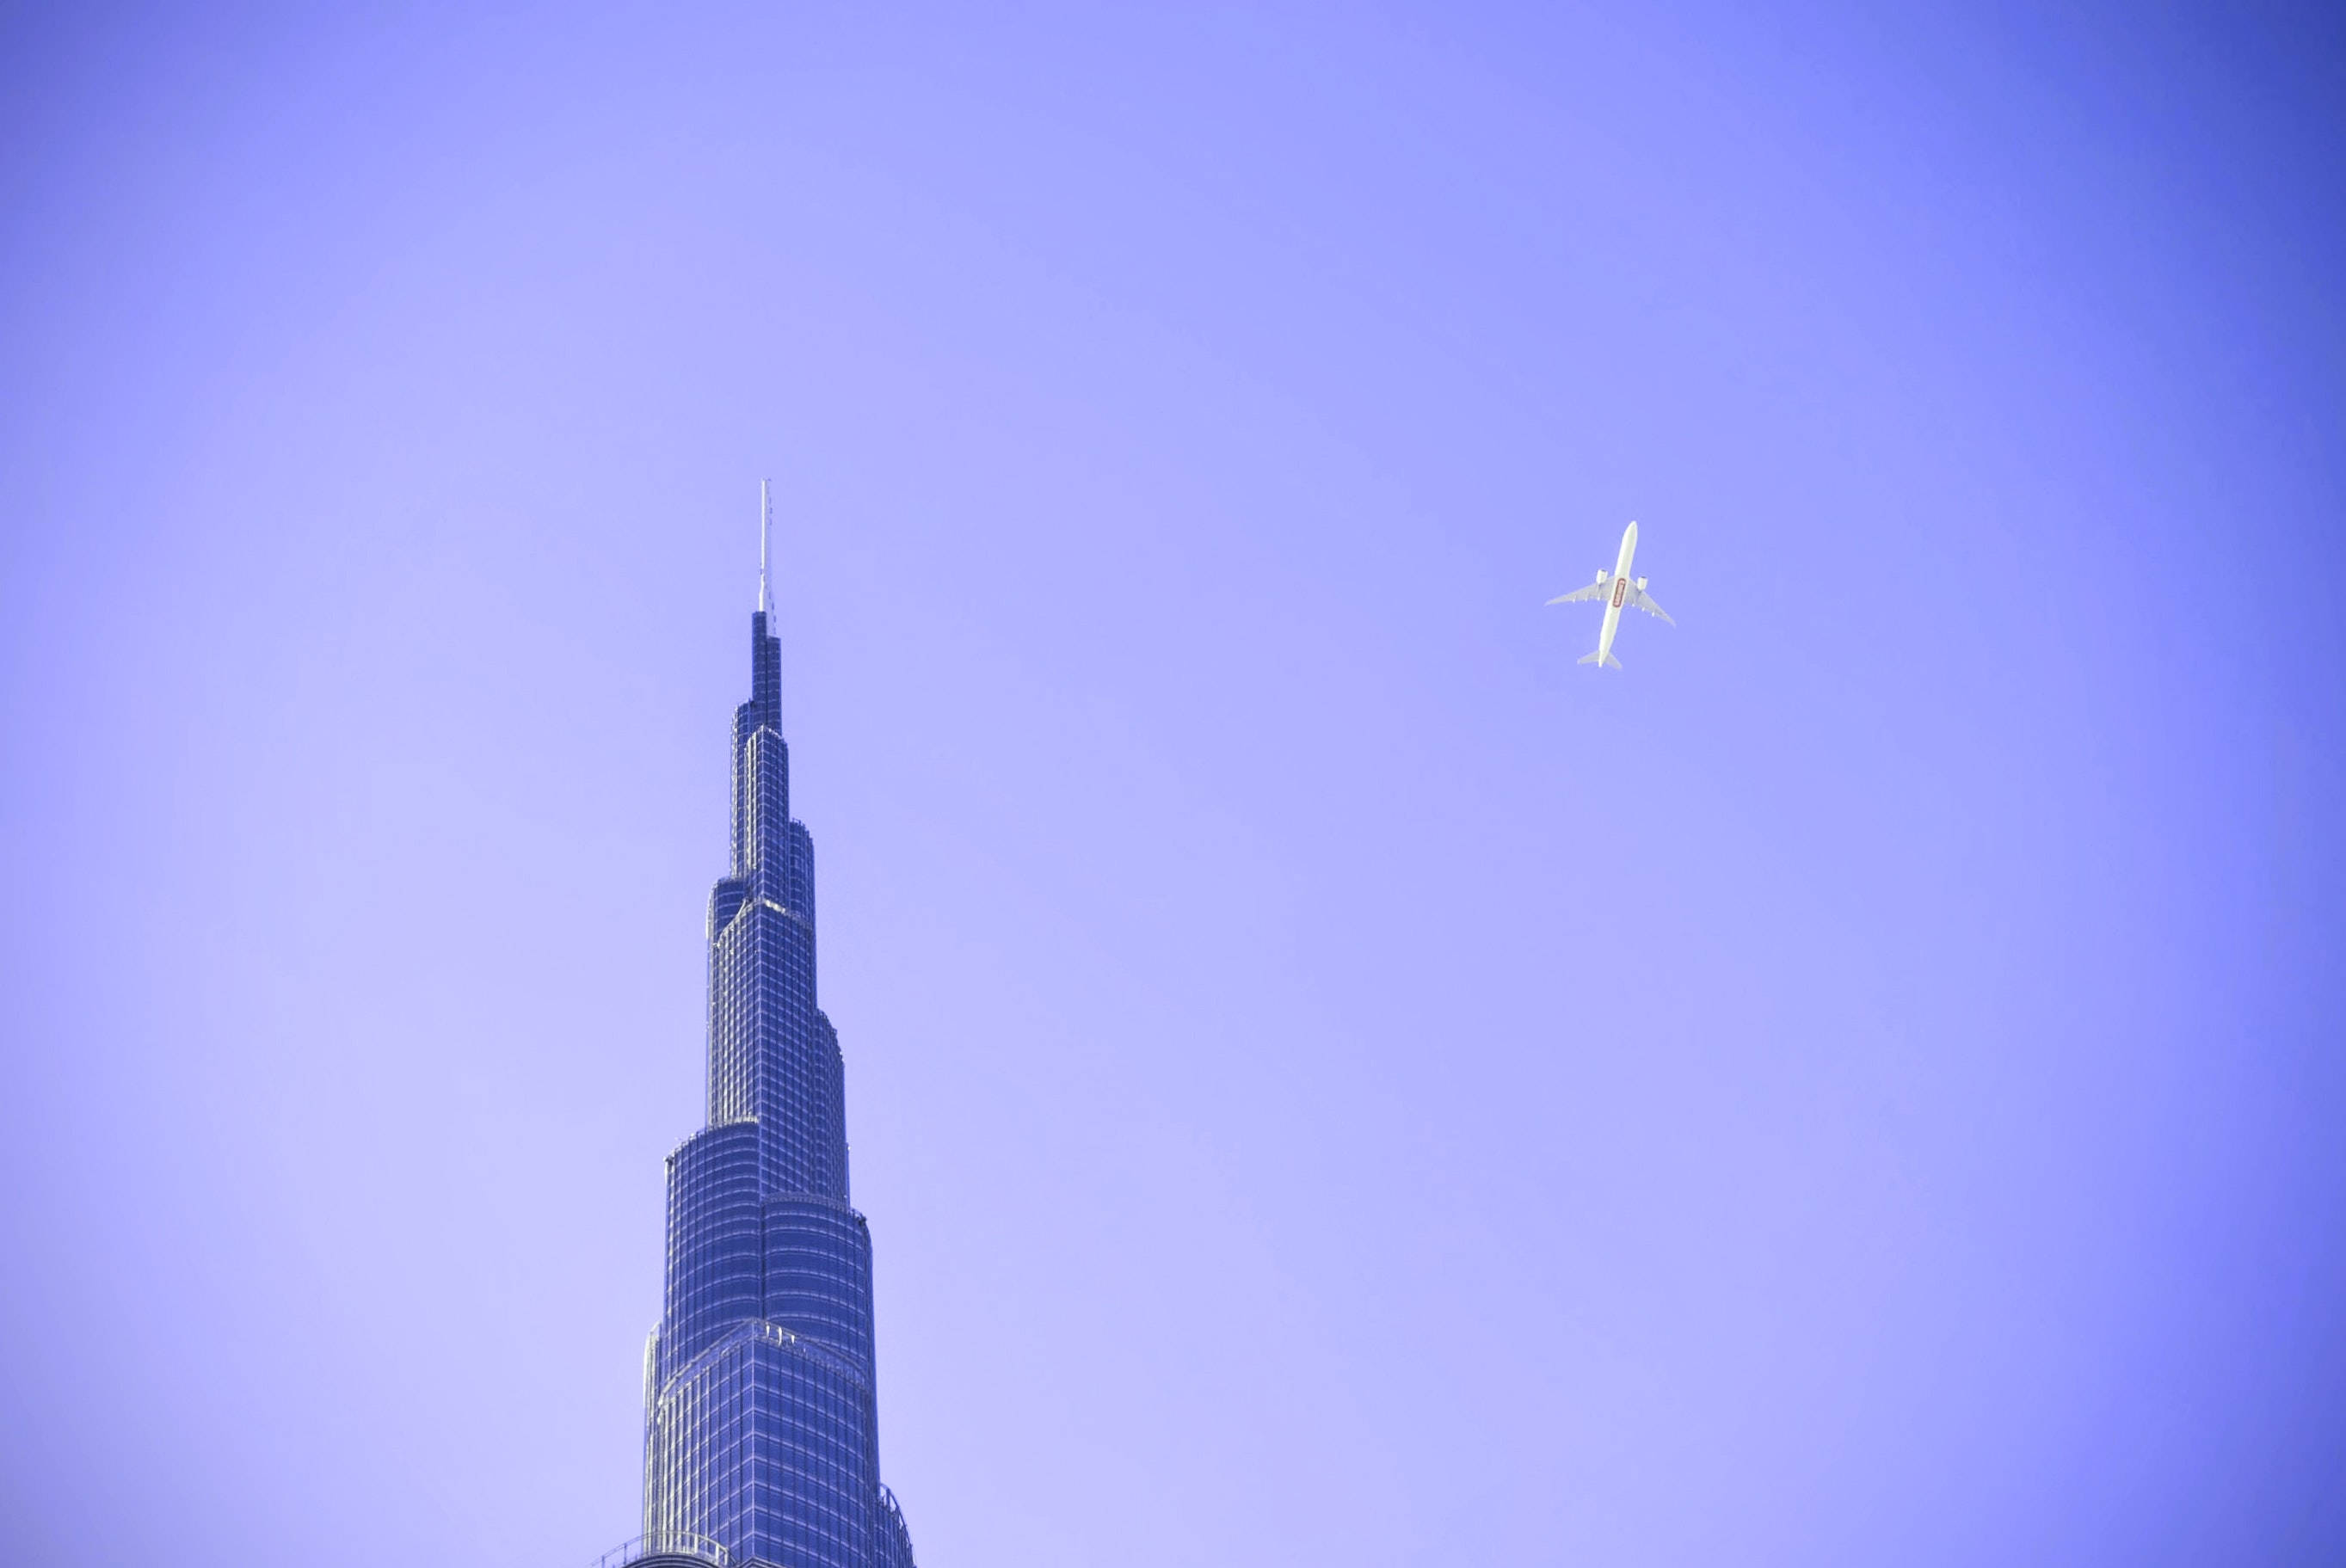 Stunning View Of Burj Khalifa With Plane In Sky Wallpaper